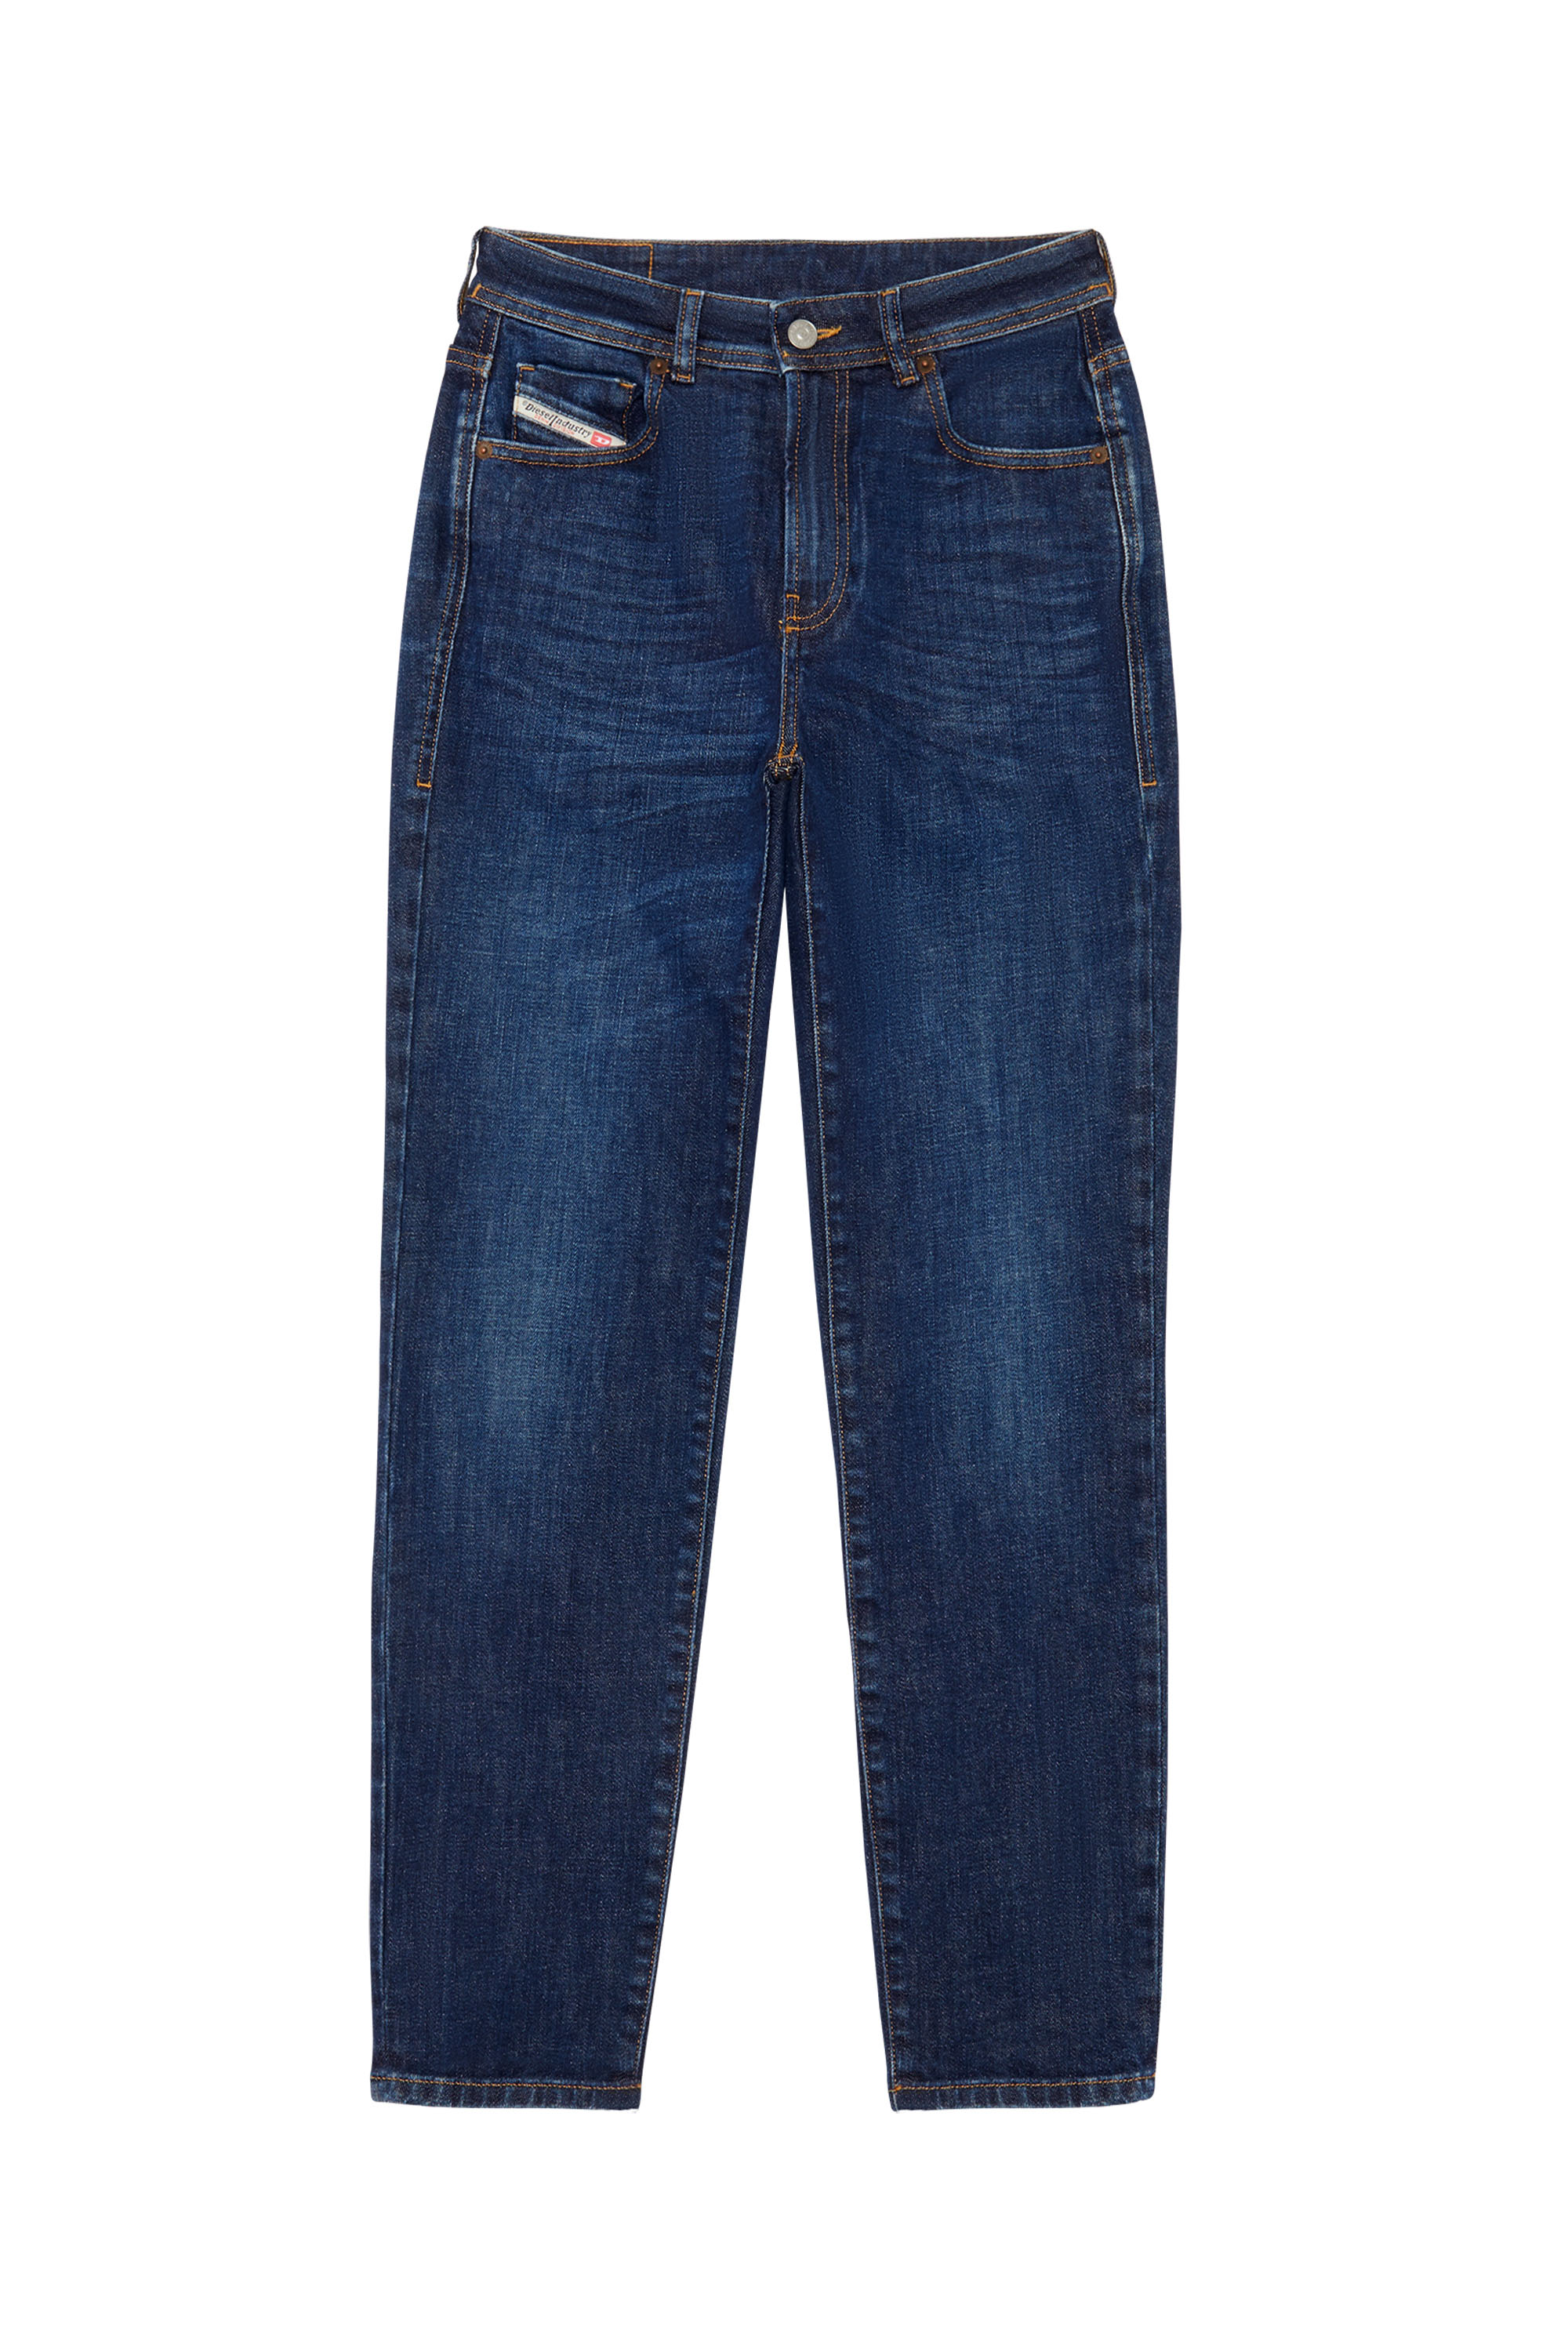 2004 09B90 Tapered Jeans, Blu Scuro - Jeans